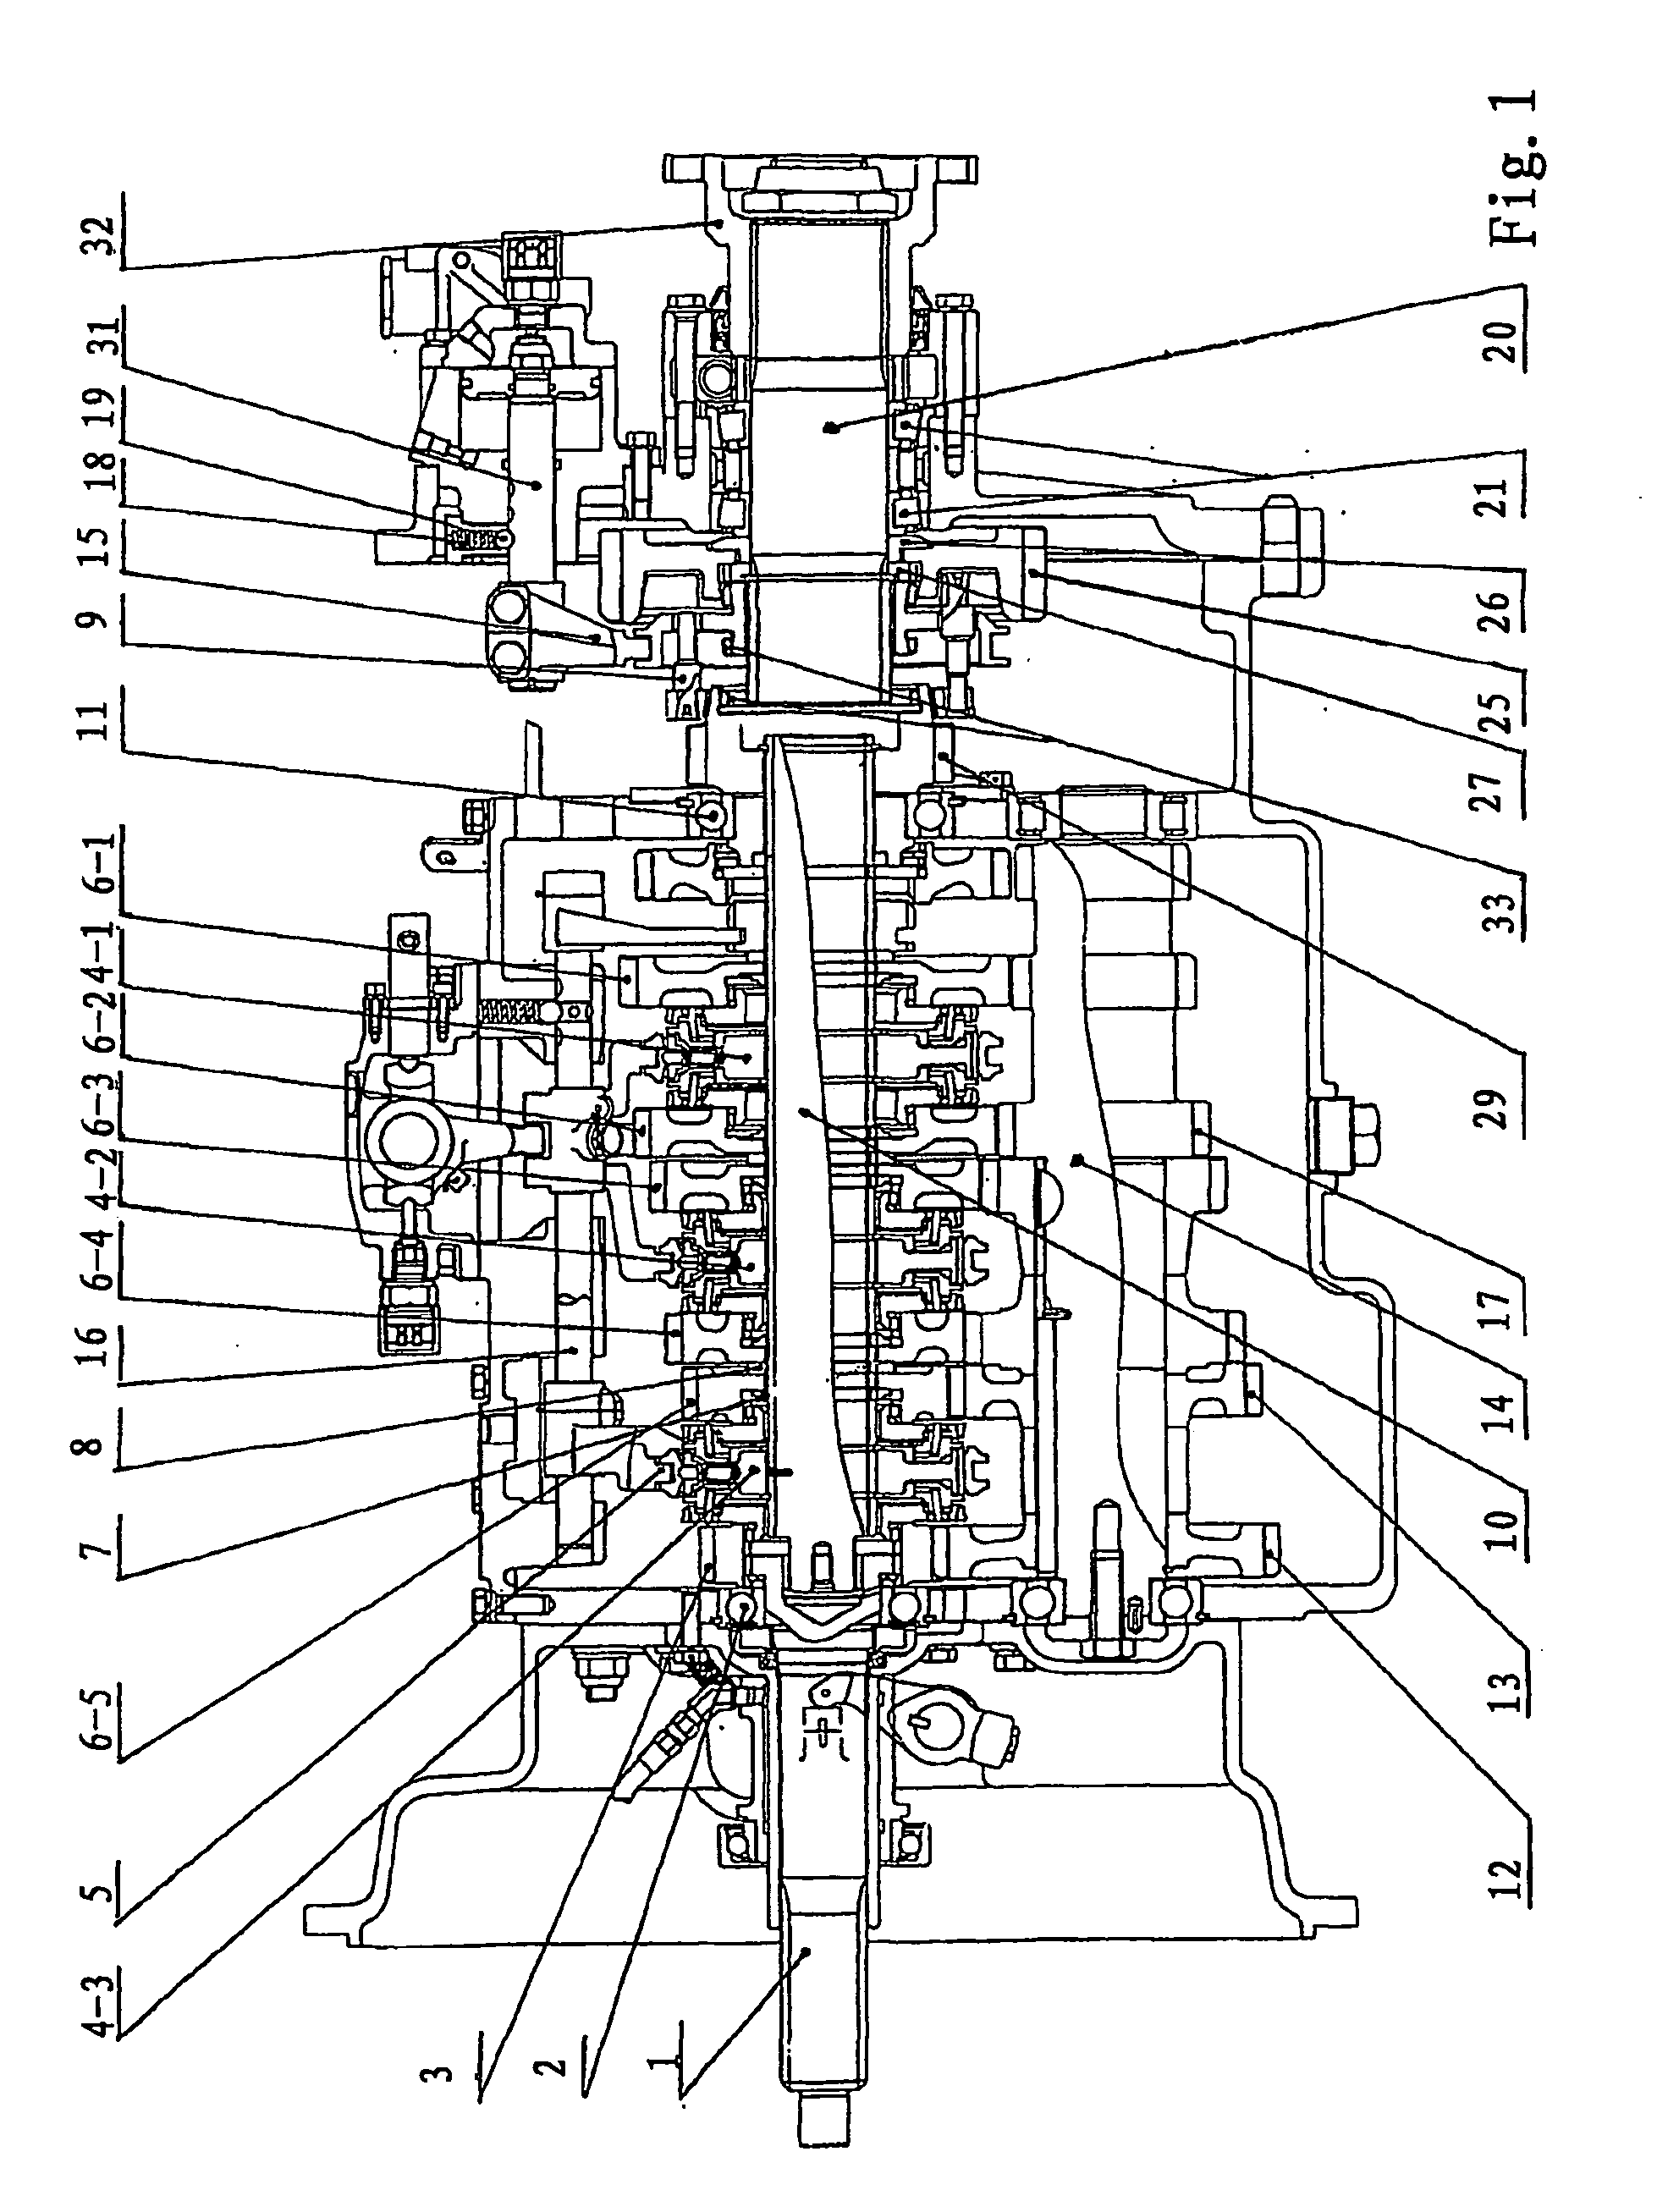 Main-Box-and-Auxiliary-Box -Structural Twin-Countershaft Twelve-Speed Transmission